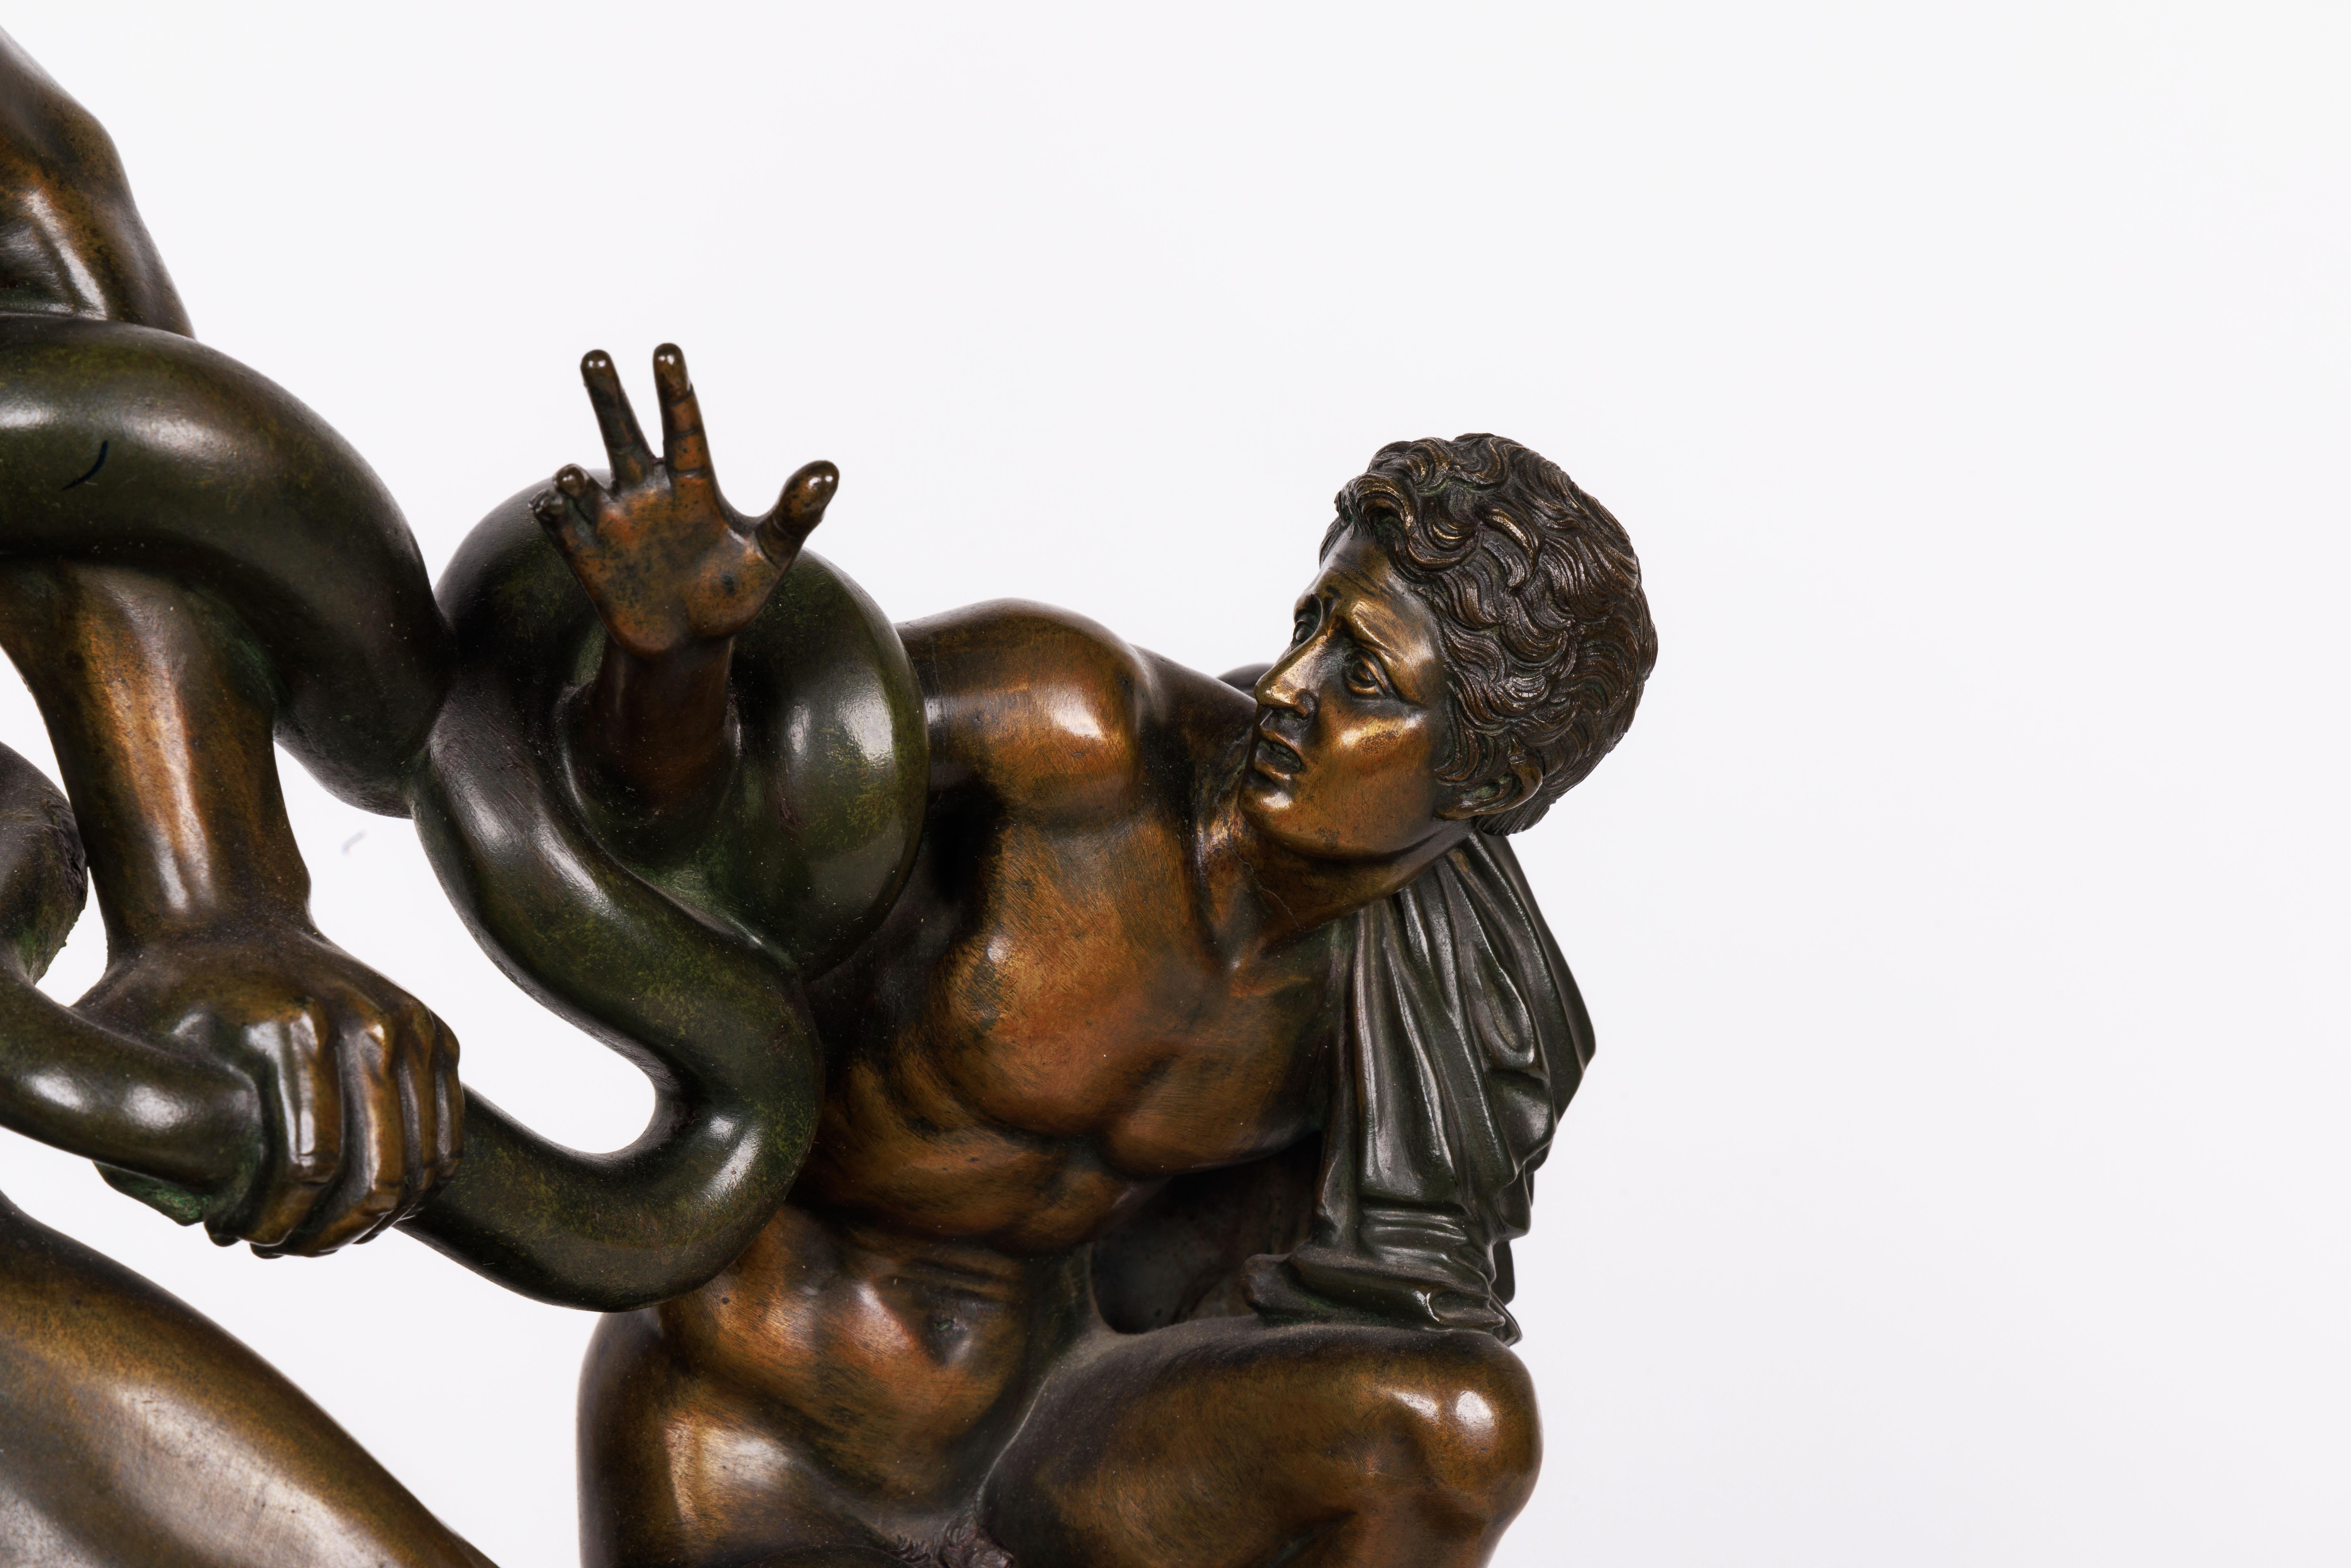 Italian Patinated Bronze Group Sculpture of Laocoon and His Sons, C. 1870 For Sale 4